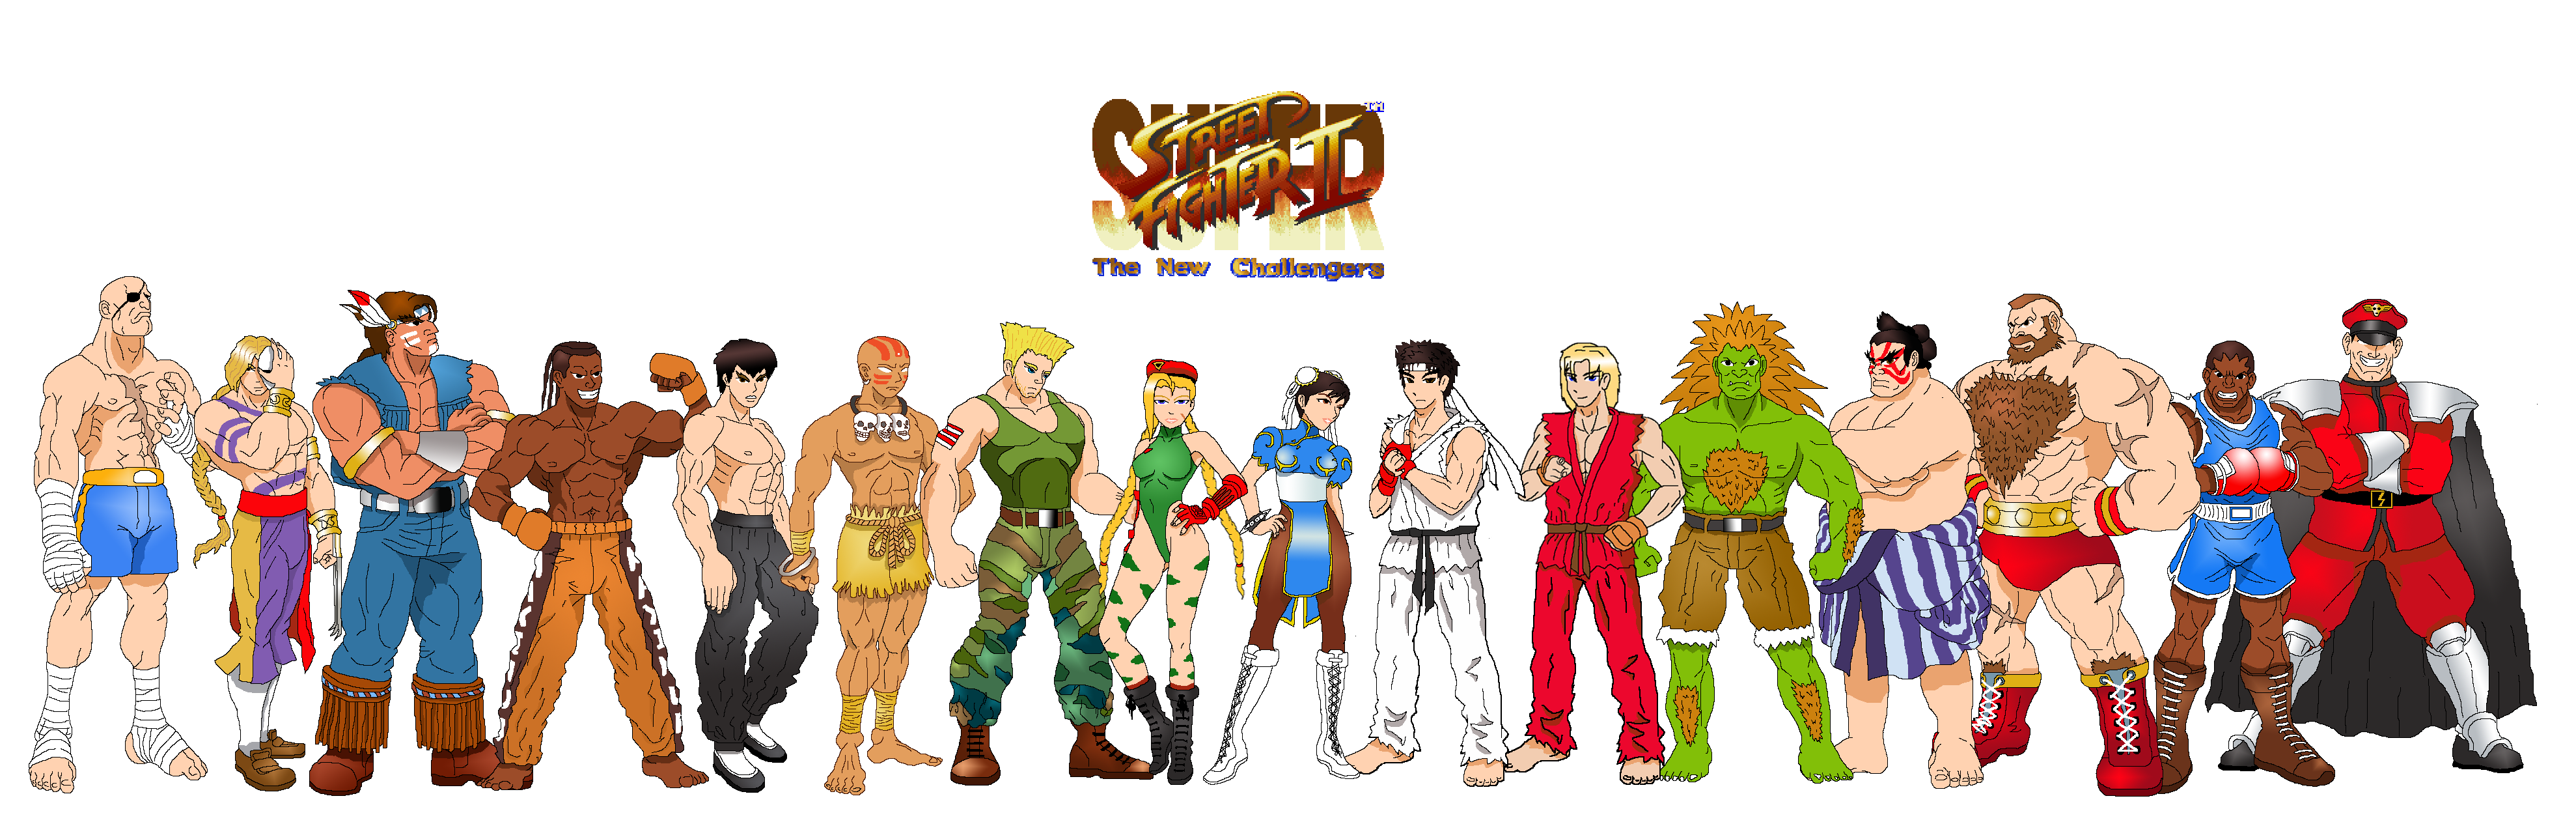 Street Fighter 2 Wallpapers - Wallpaper Cave